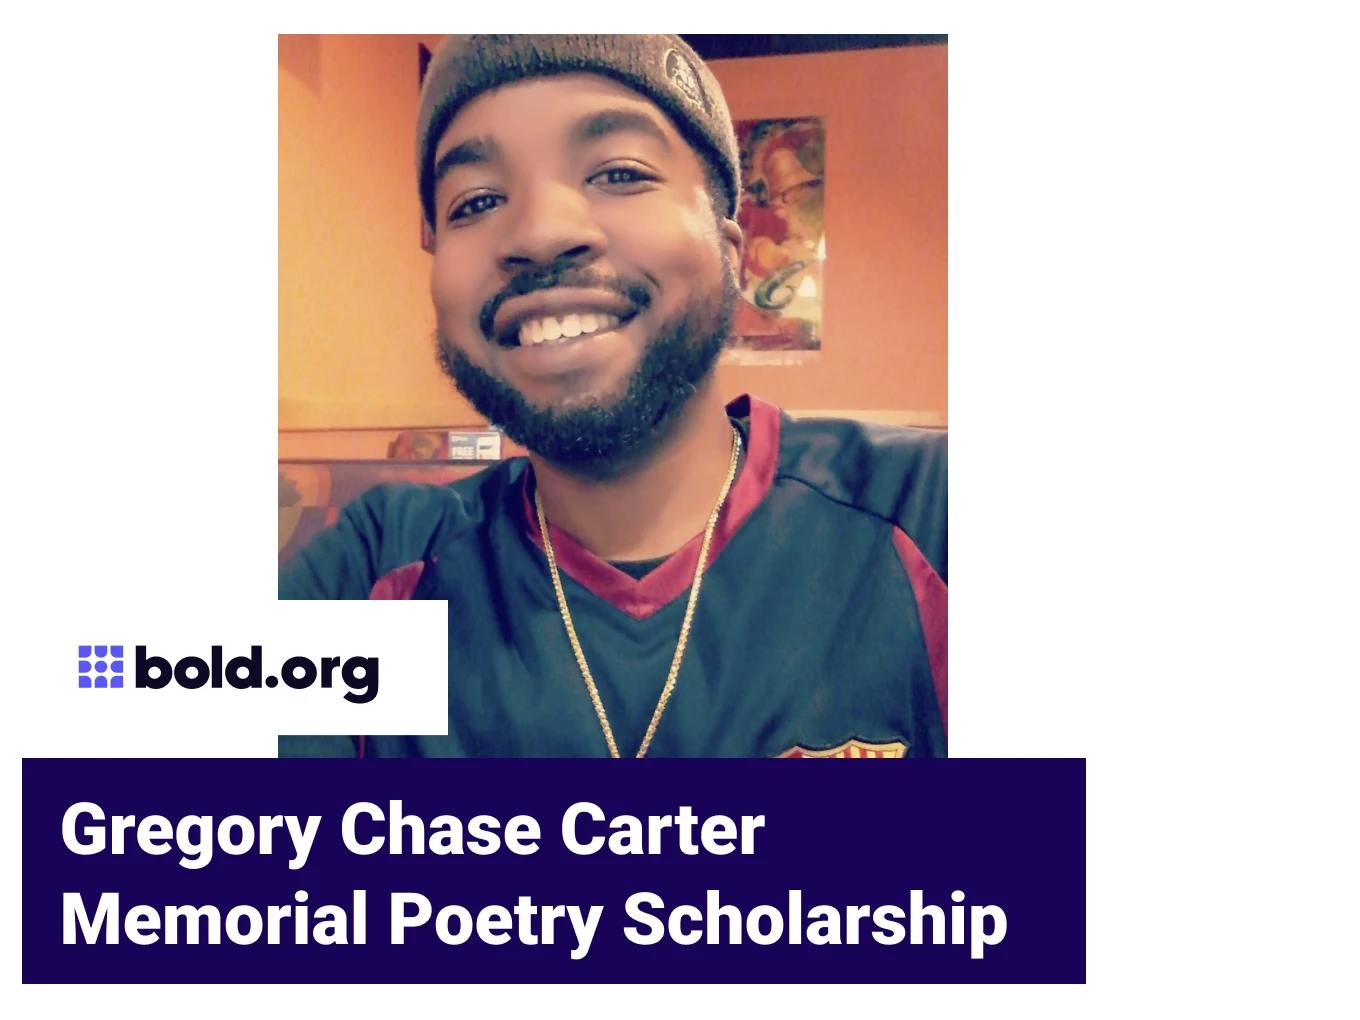 Gregory Chase Carter Memorial Poetry Scholarship